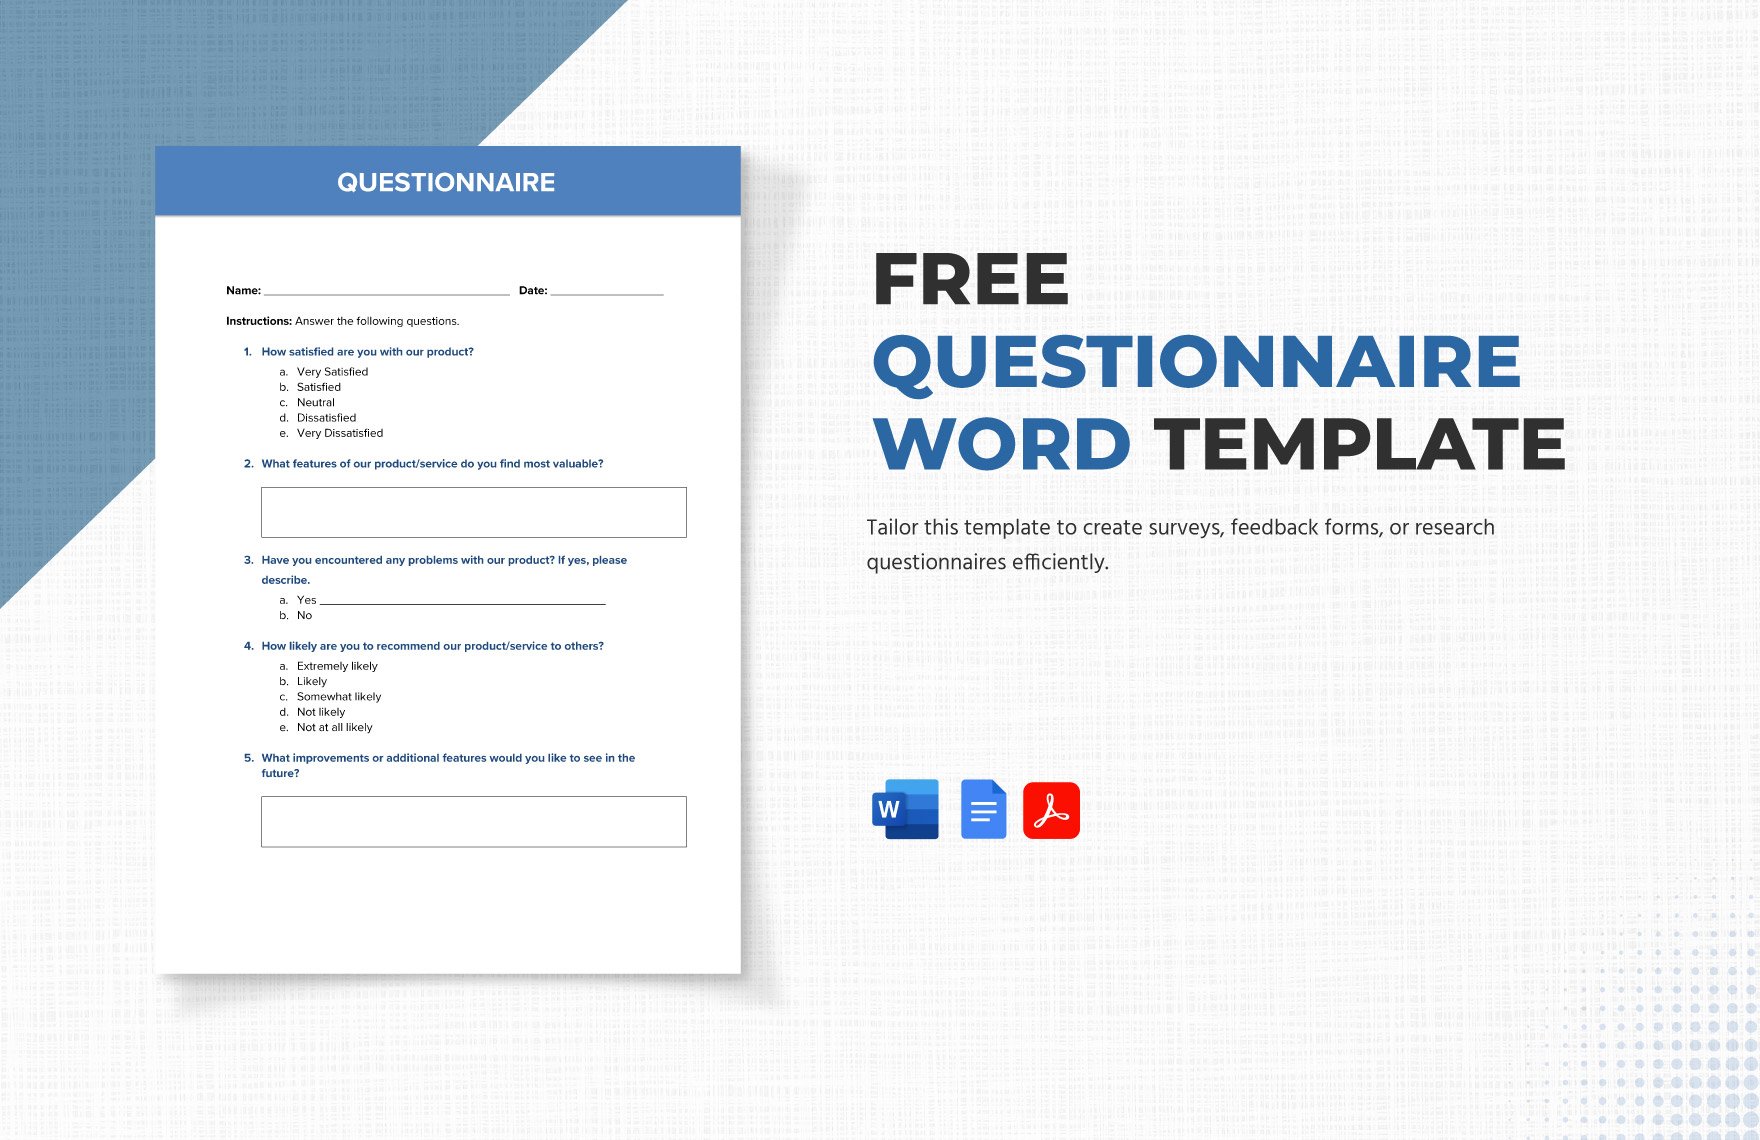 Free Questionnaire Word Template